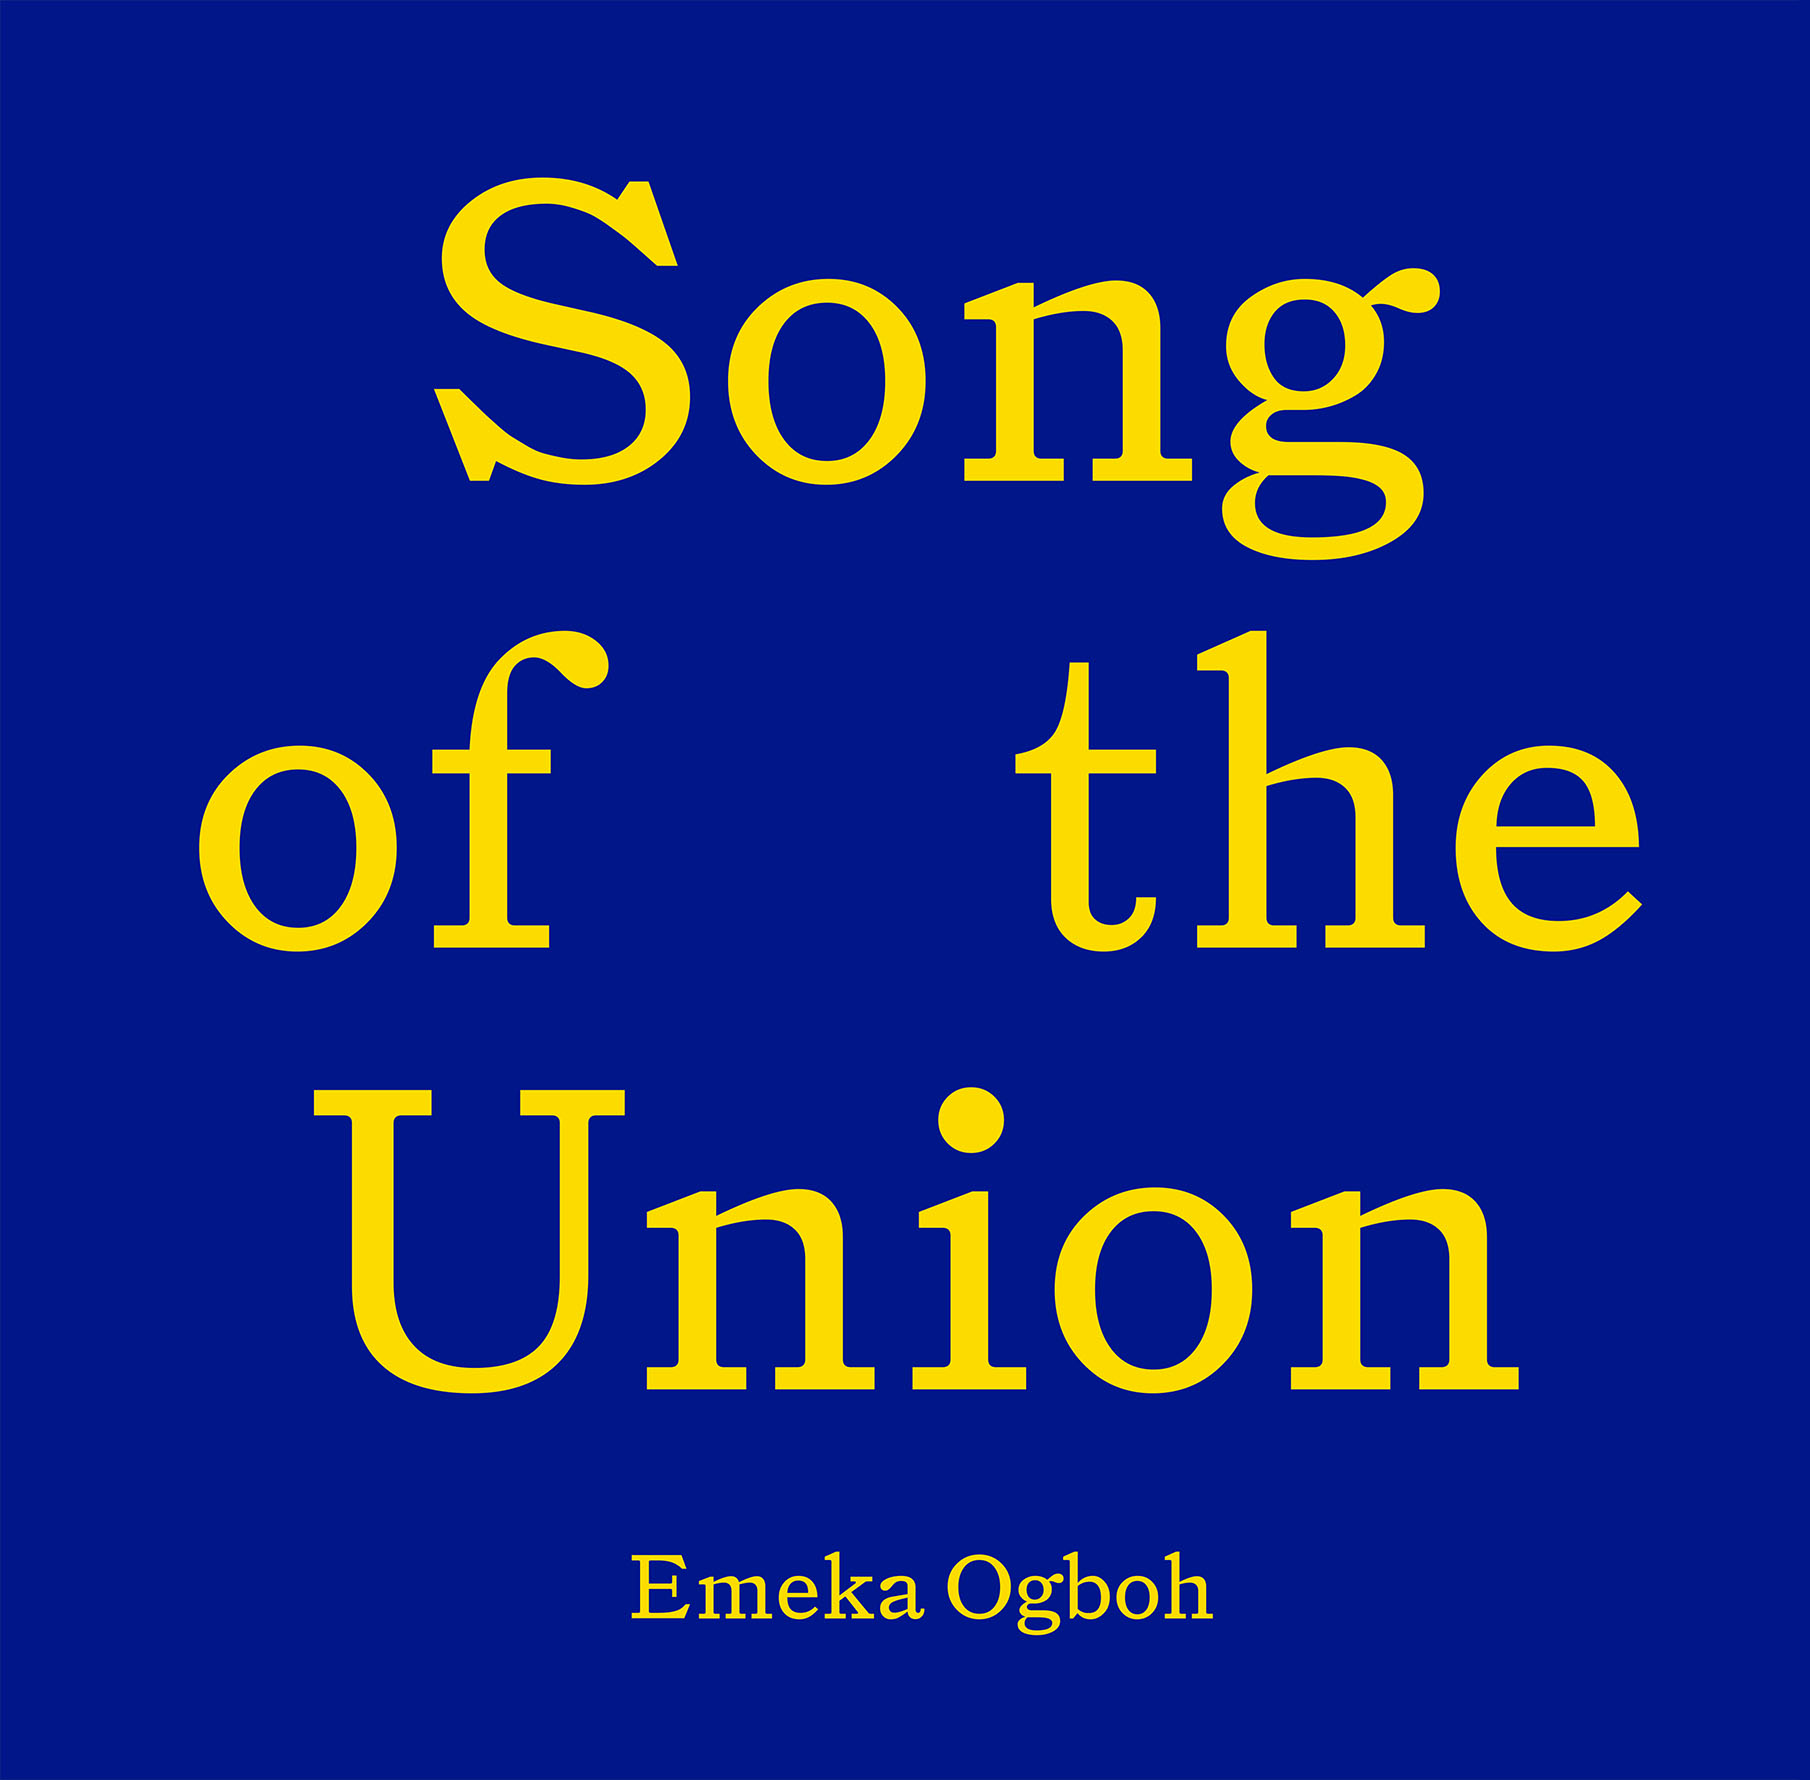 Emeka Ogboh / Song of the Union